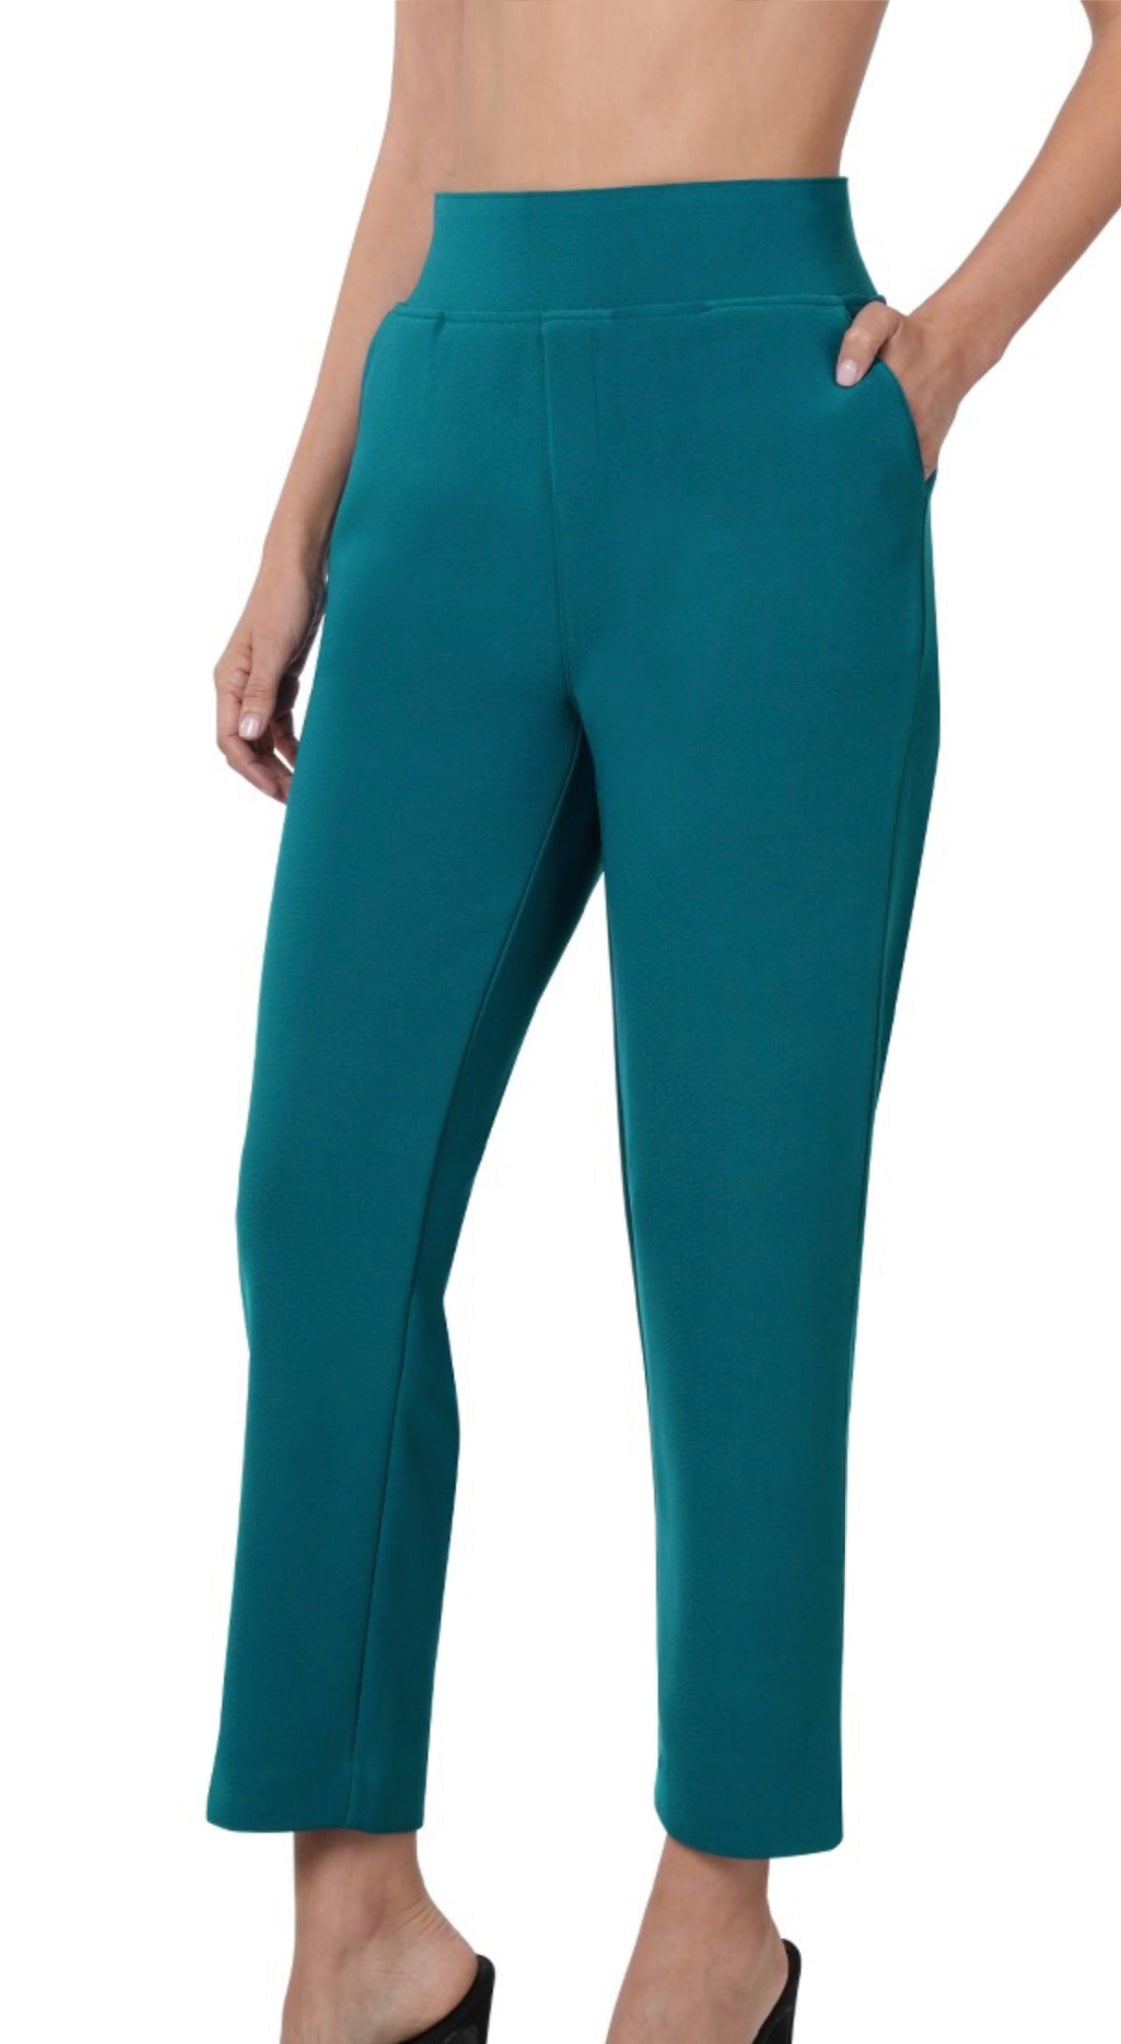 Delightful Must Have Pull On Work Pants in Teal and Ash Grey – The